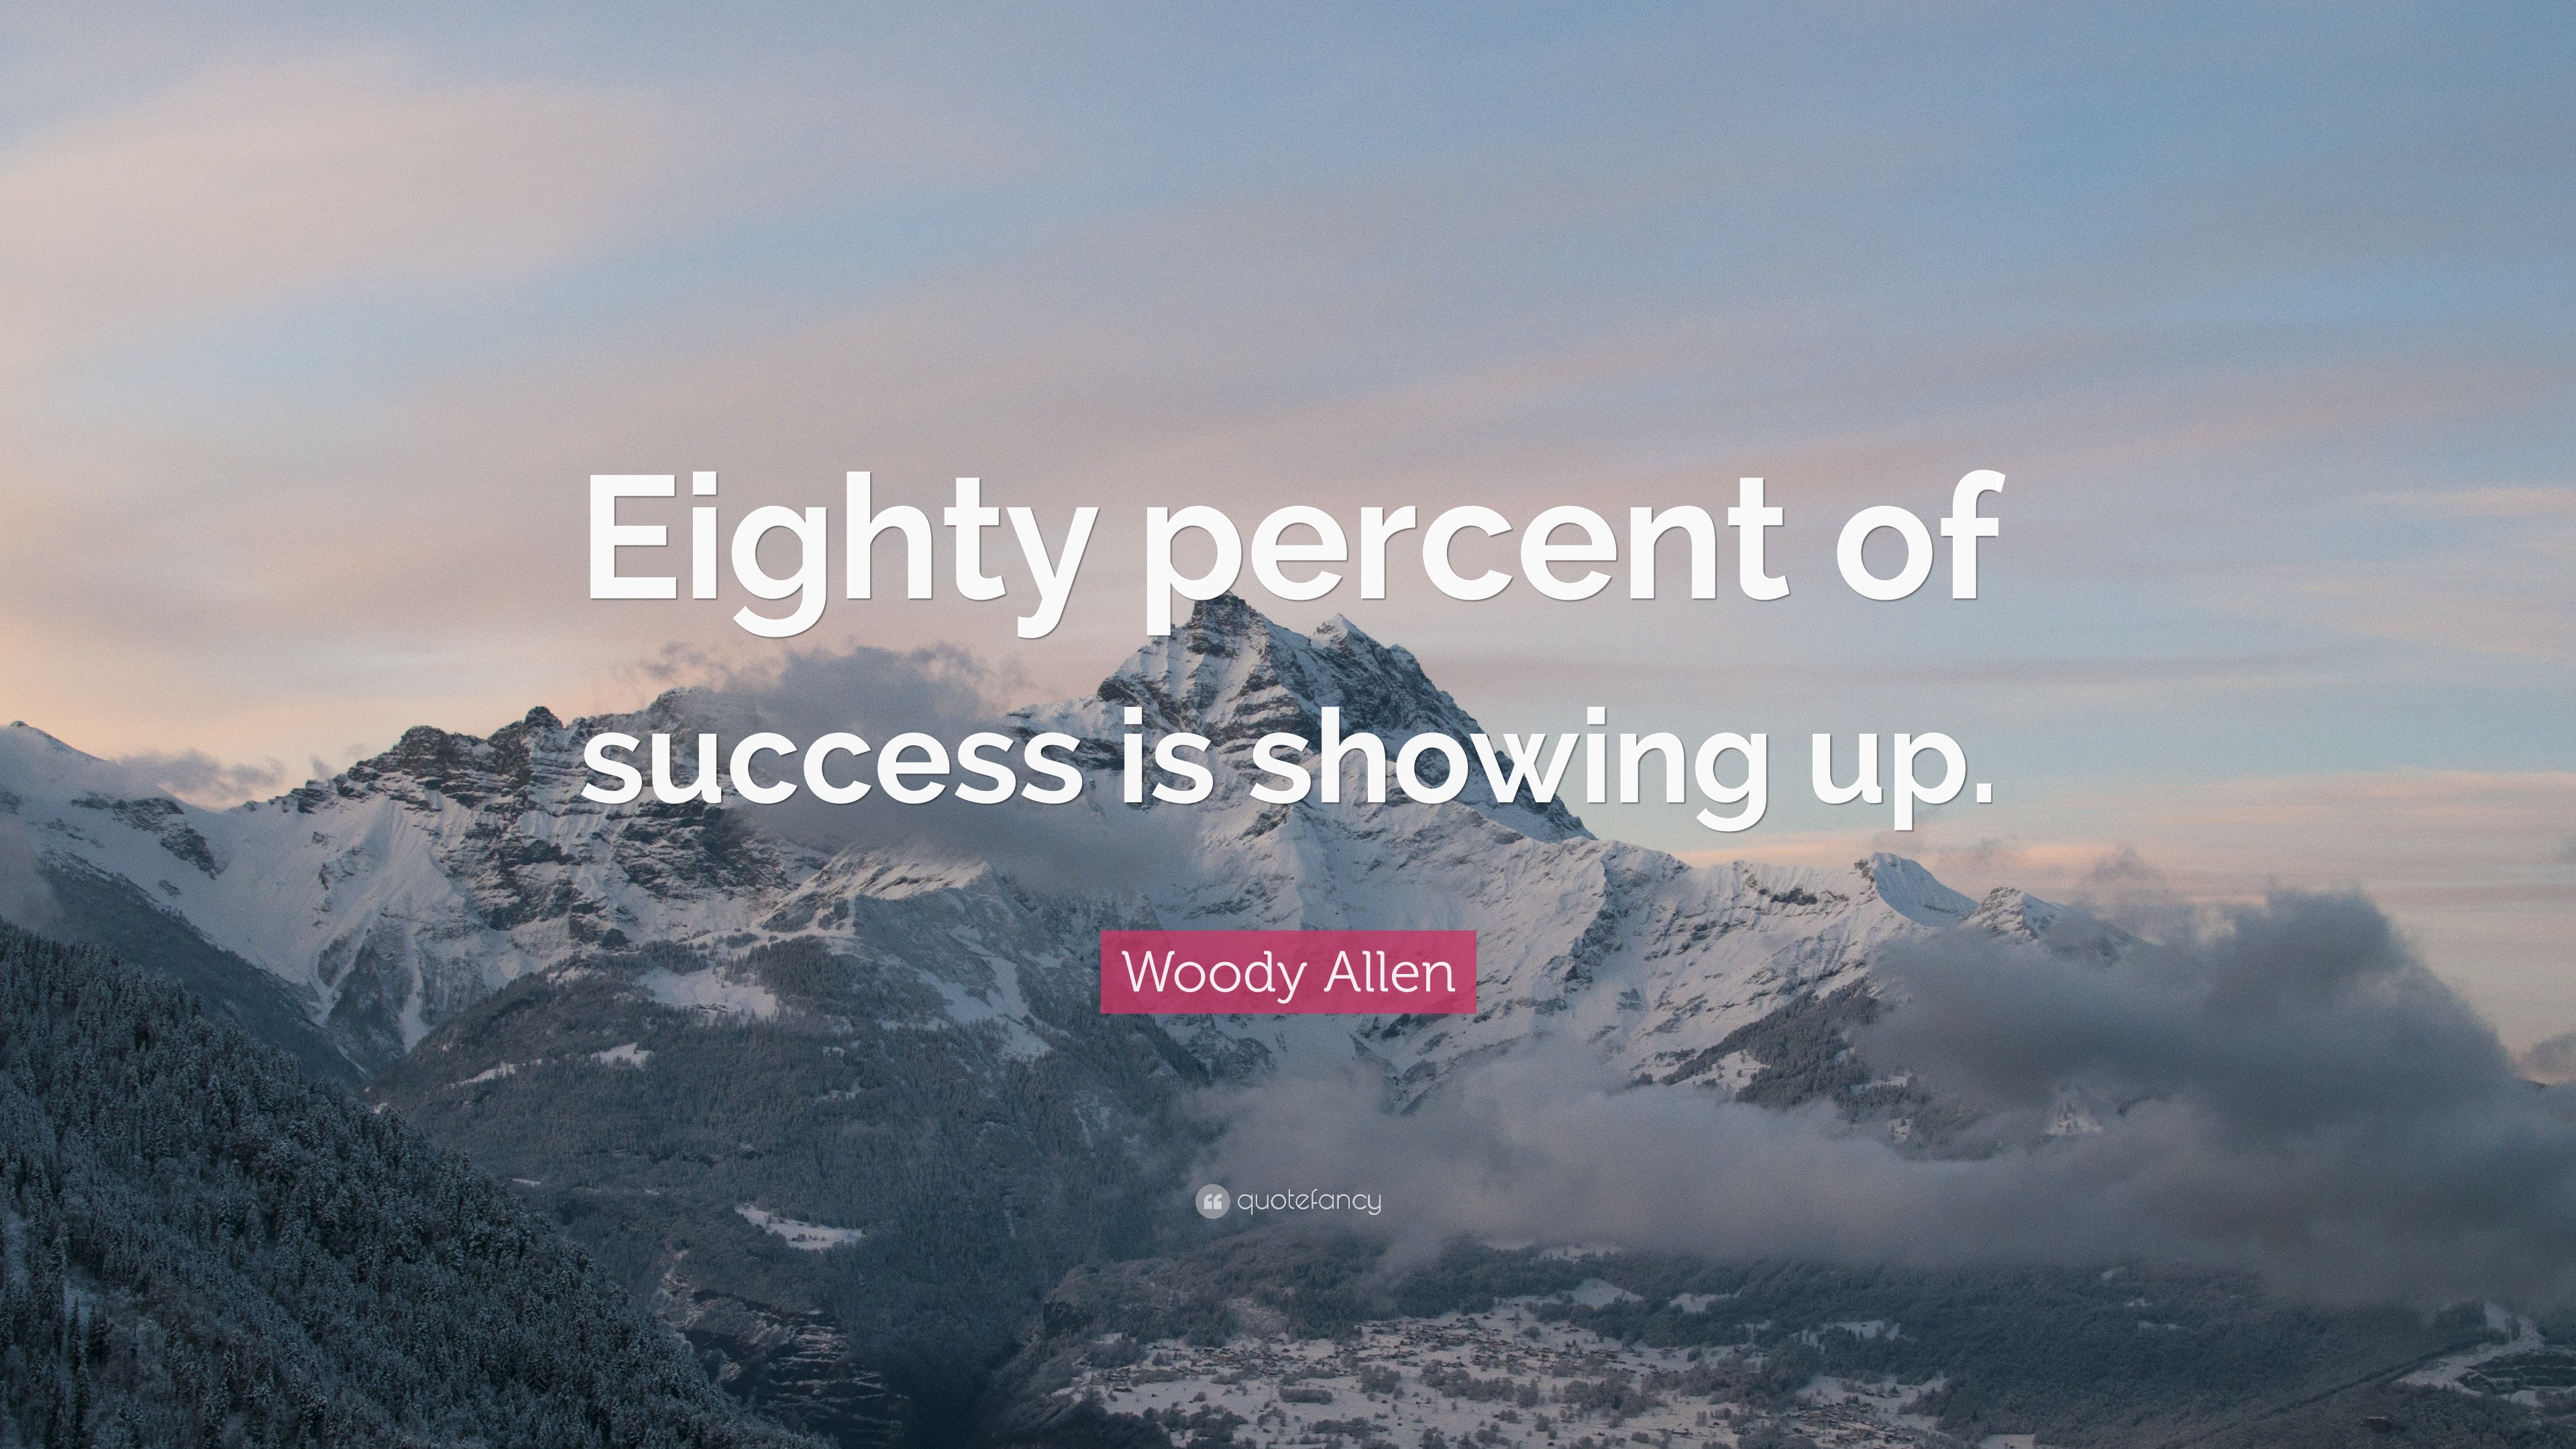 Woody Allen Quote “eighty Percent Of Success Is Showing Up” 23 Wallpapers Quotefancy 8225